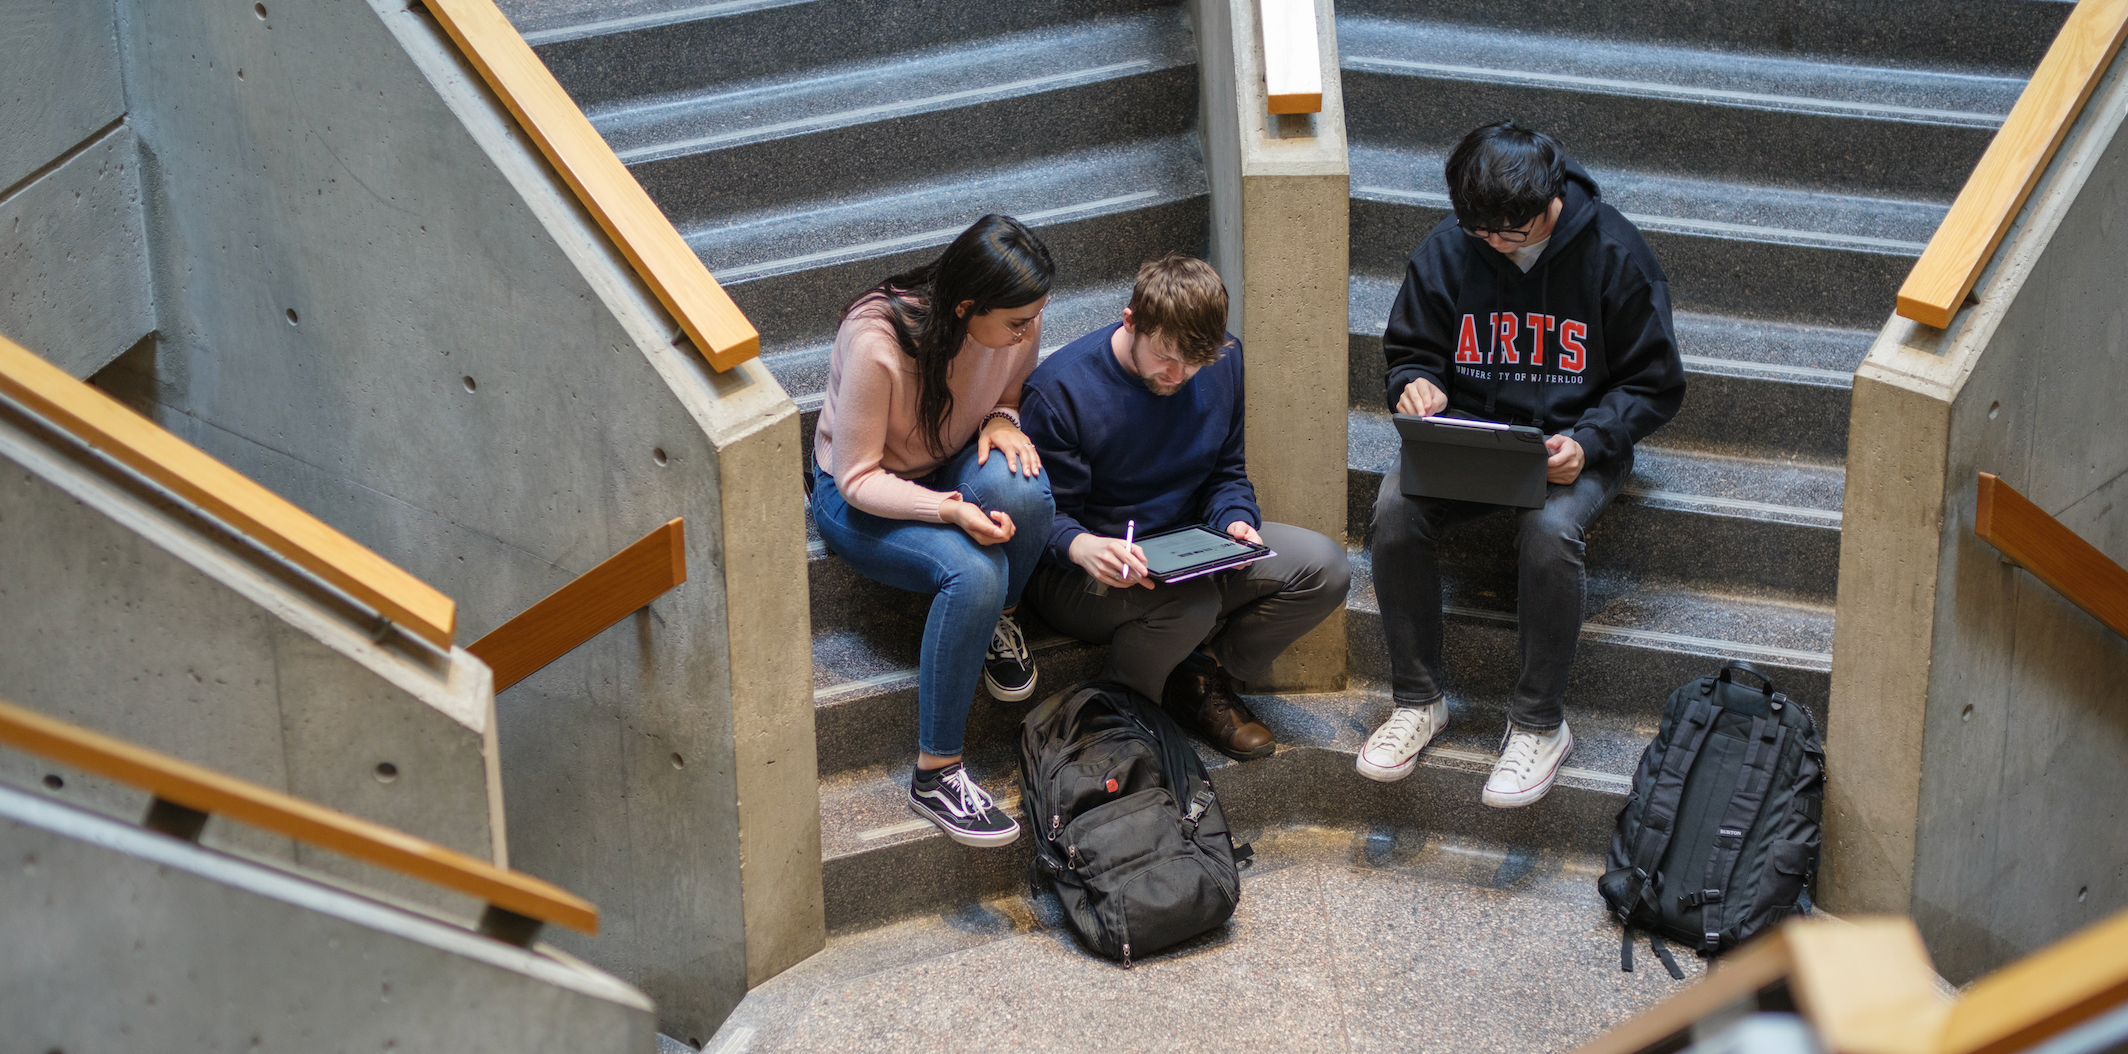 Students sitting on staircase reading